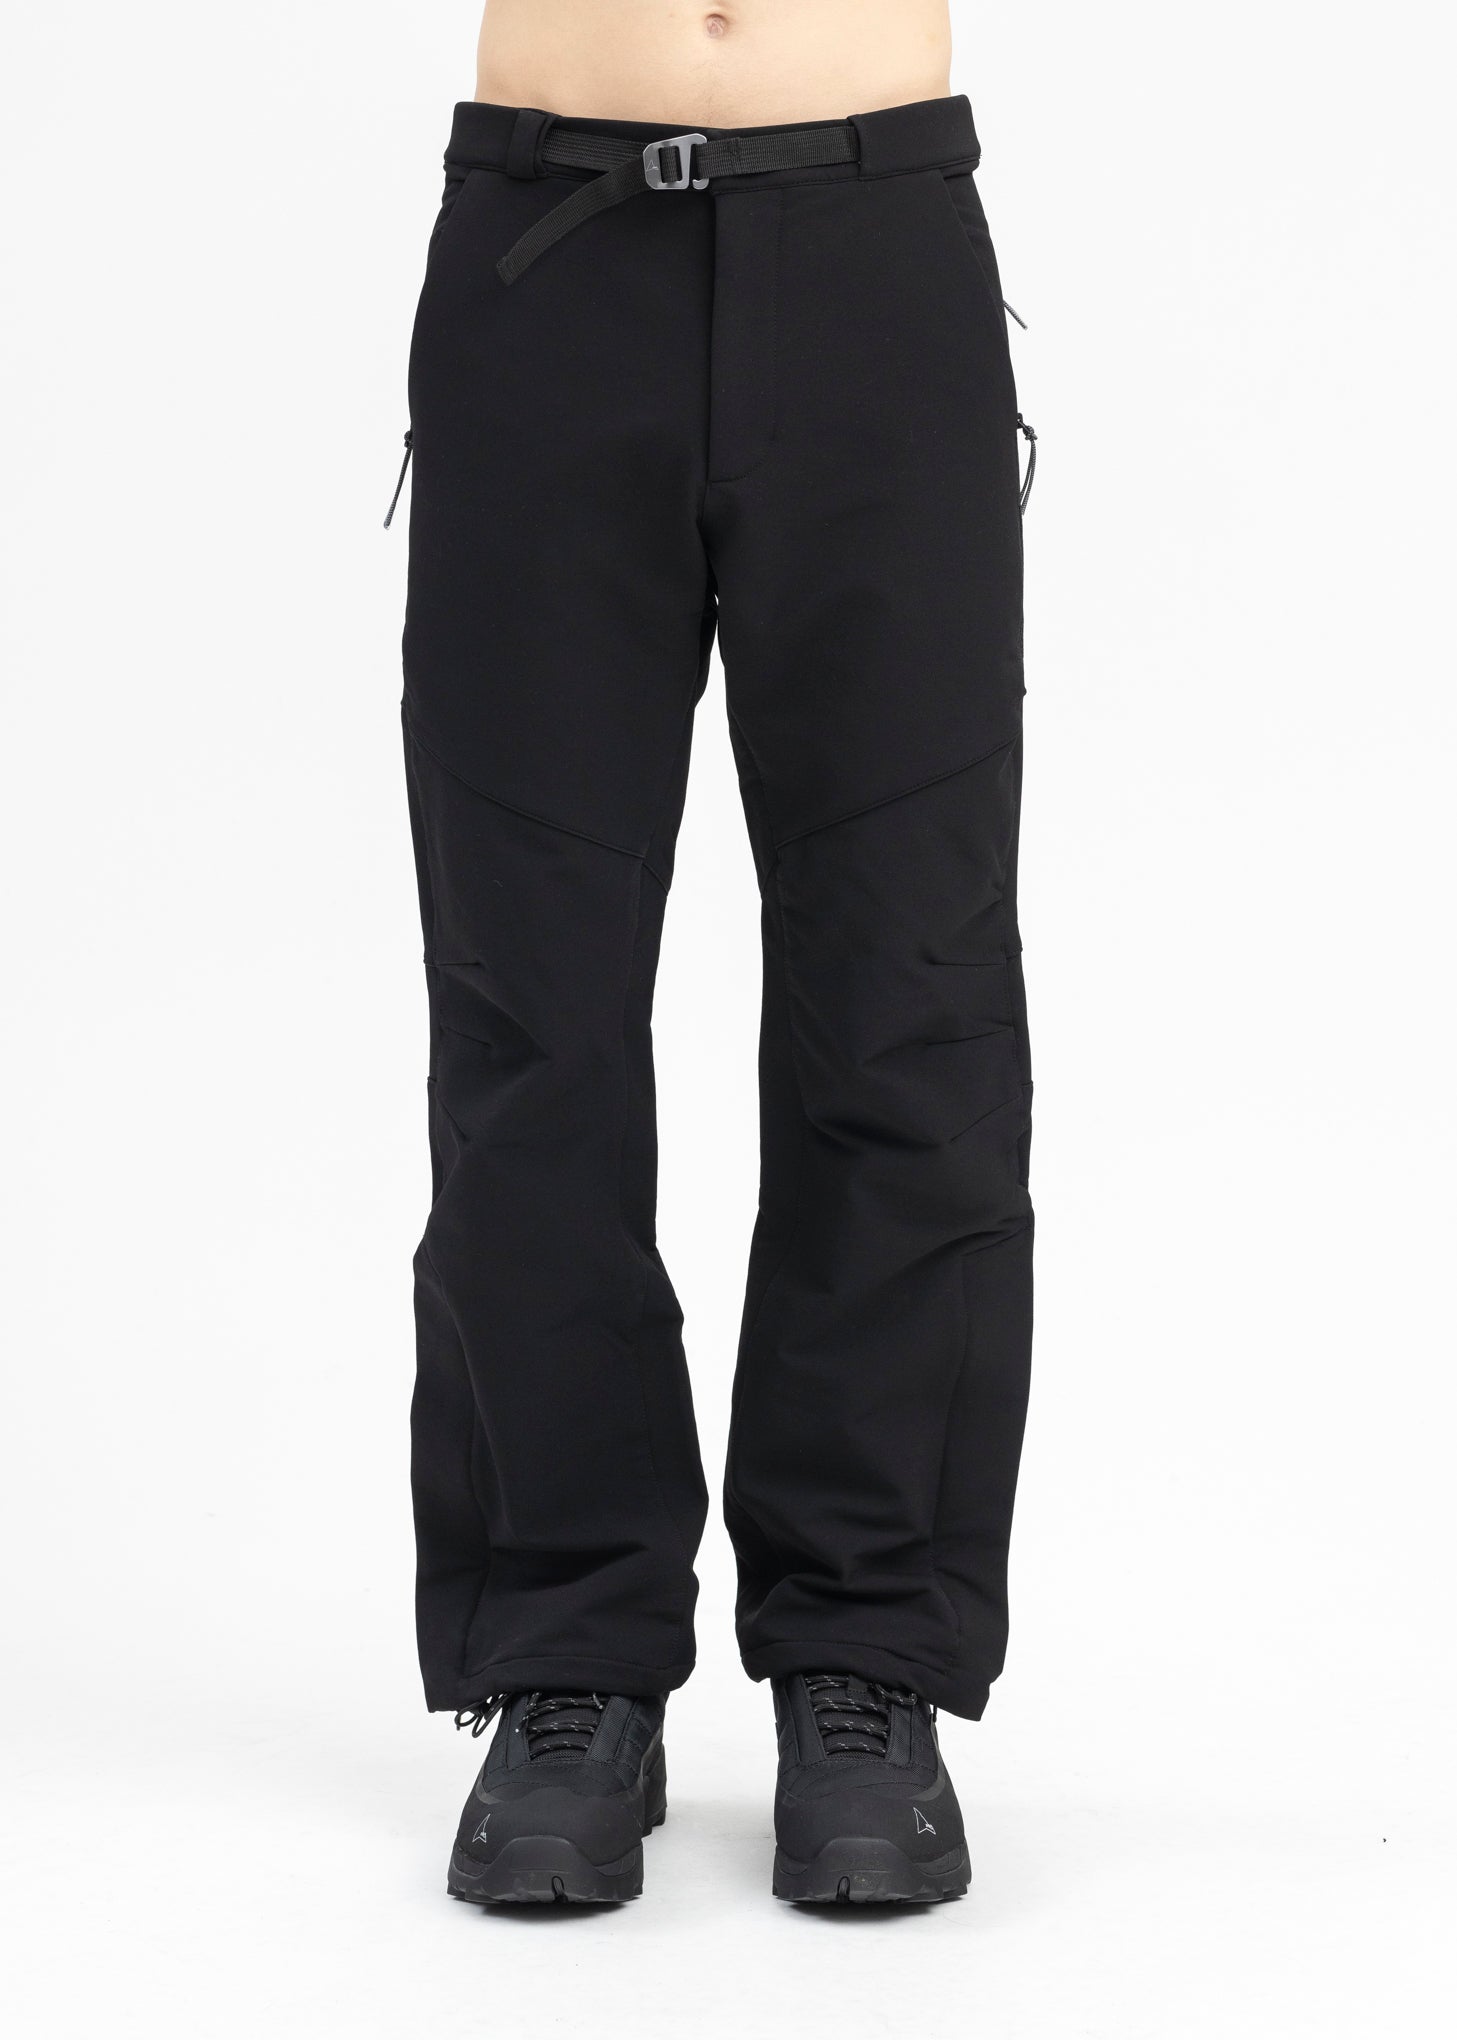 BLACK TECHNICAL TROUSERS SOFTSHELL – 017 Shop